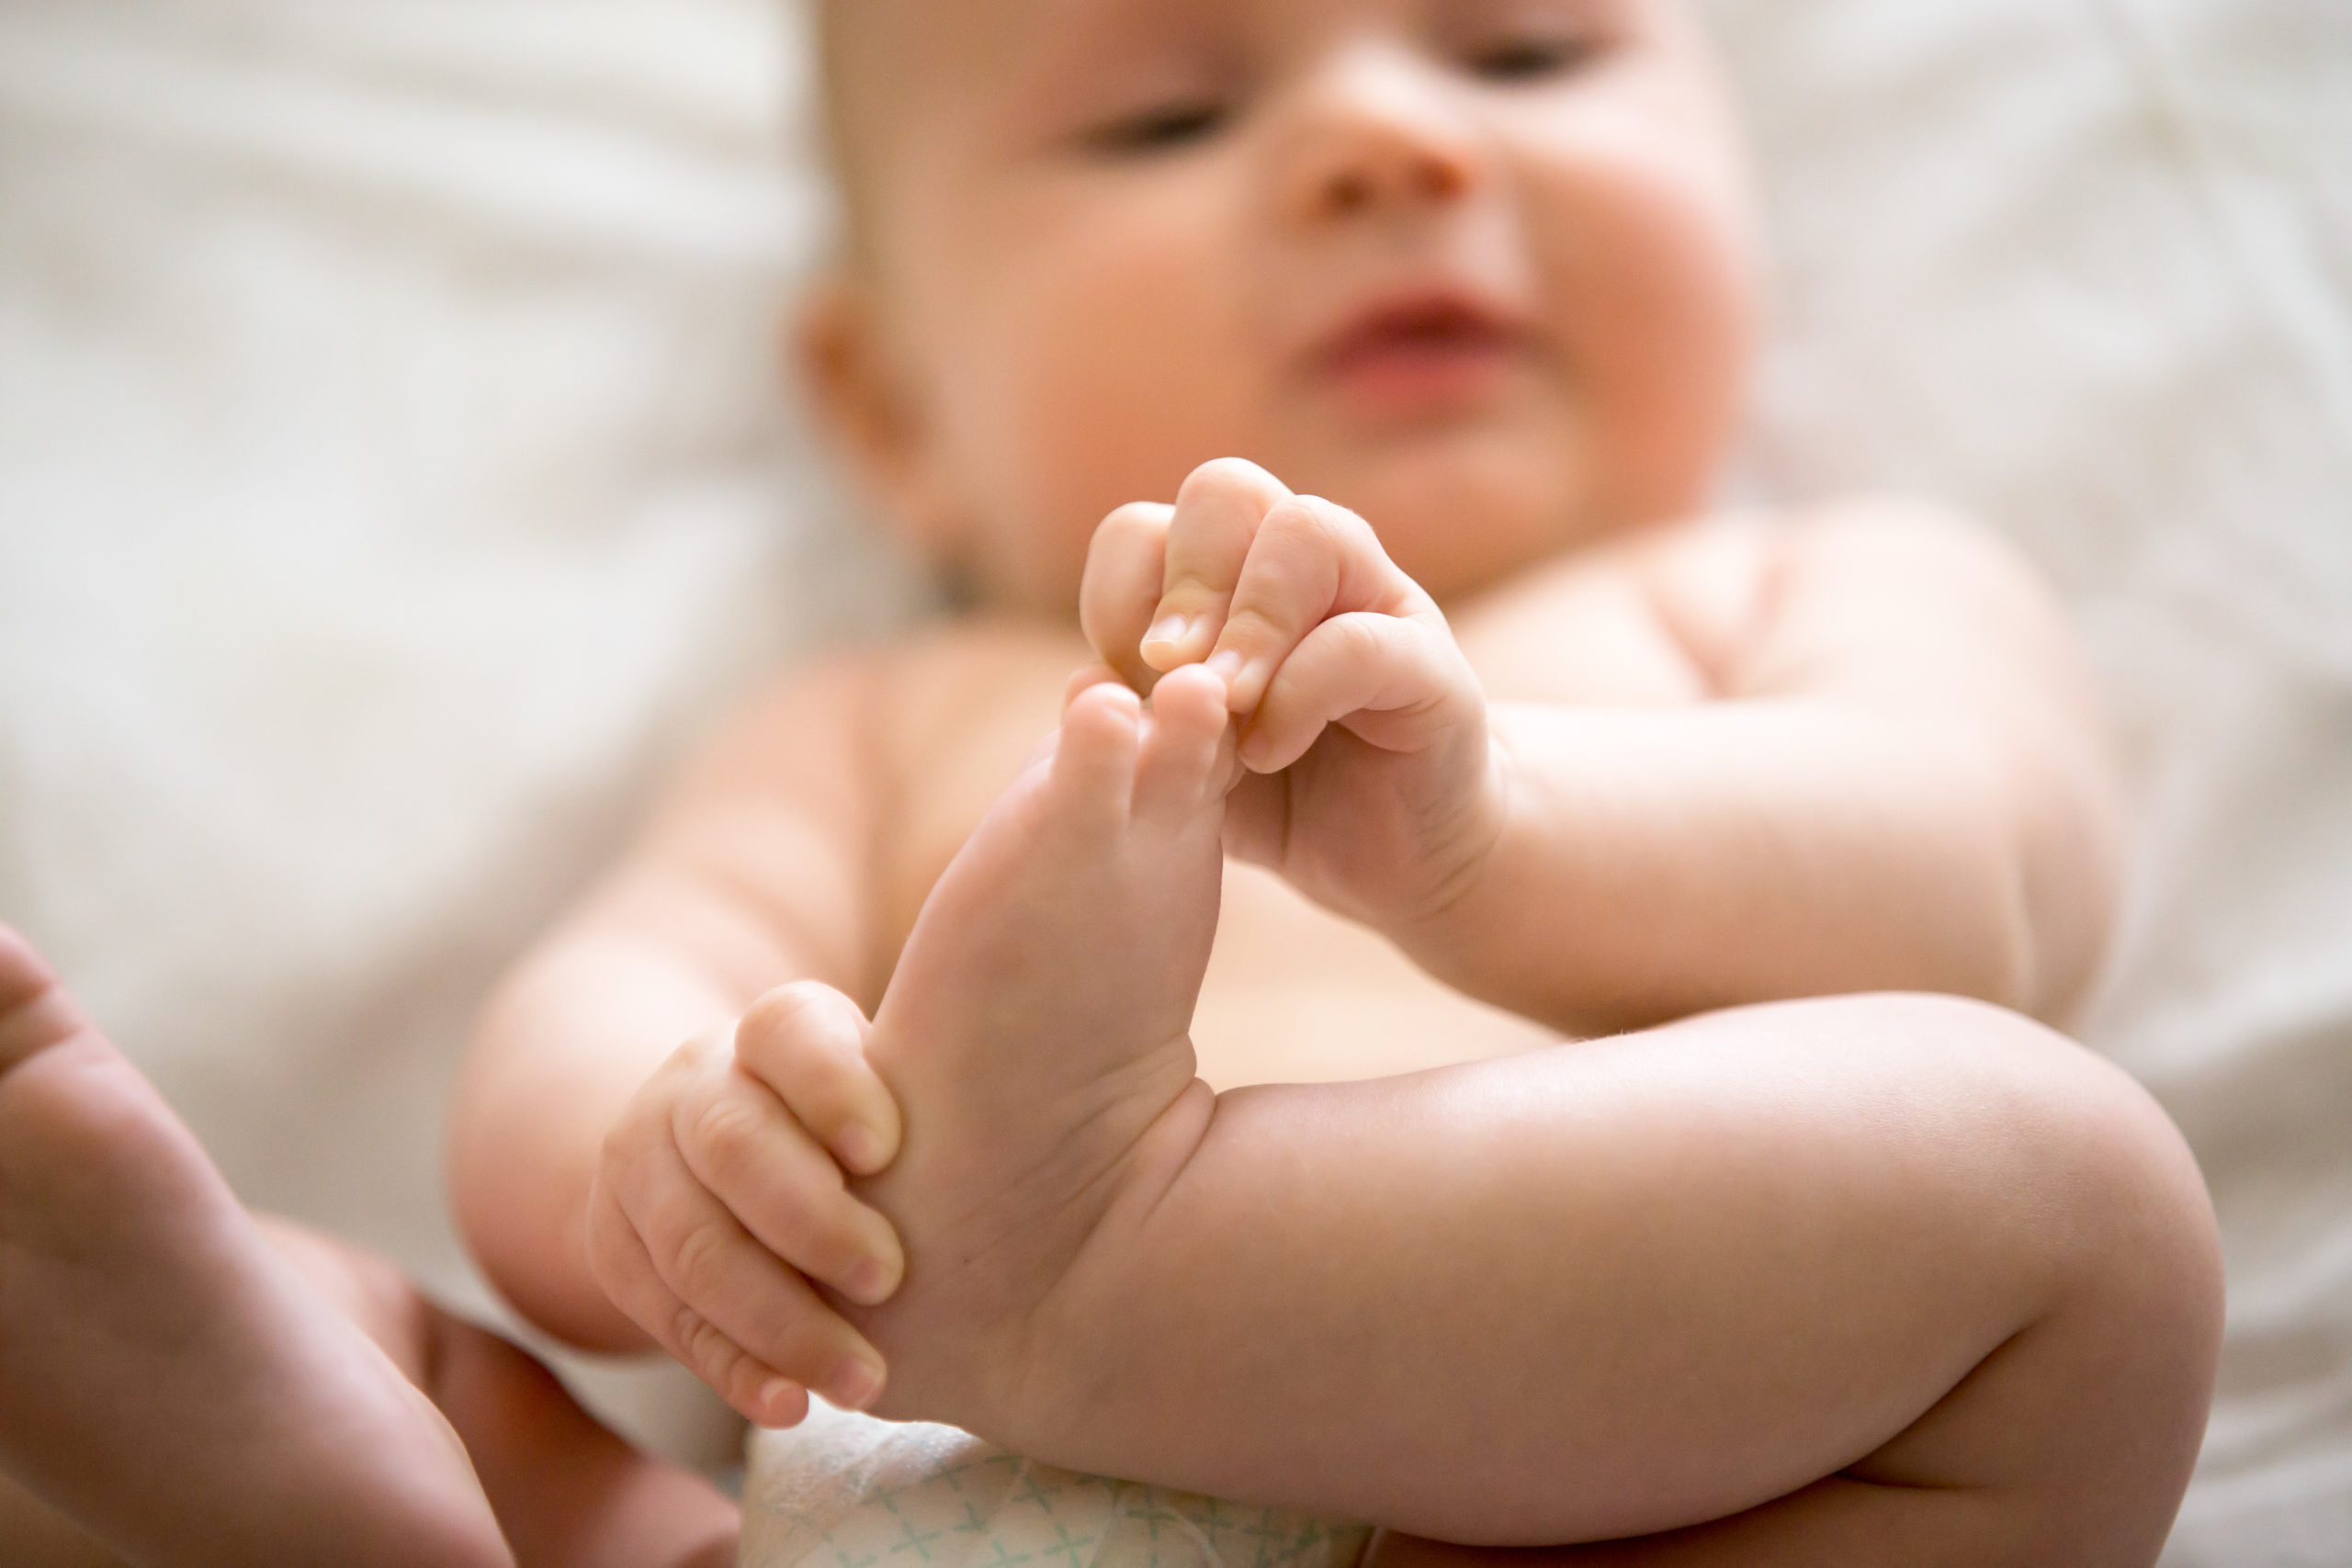 Adorable baby taking an interest in his feet